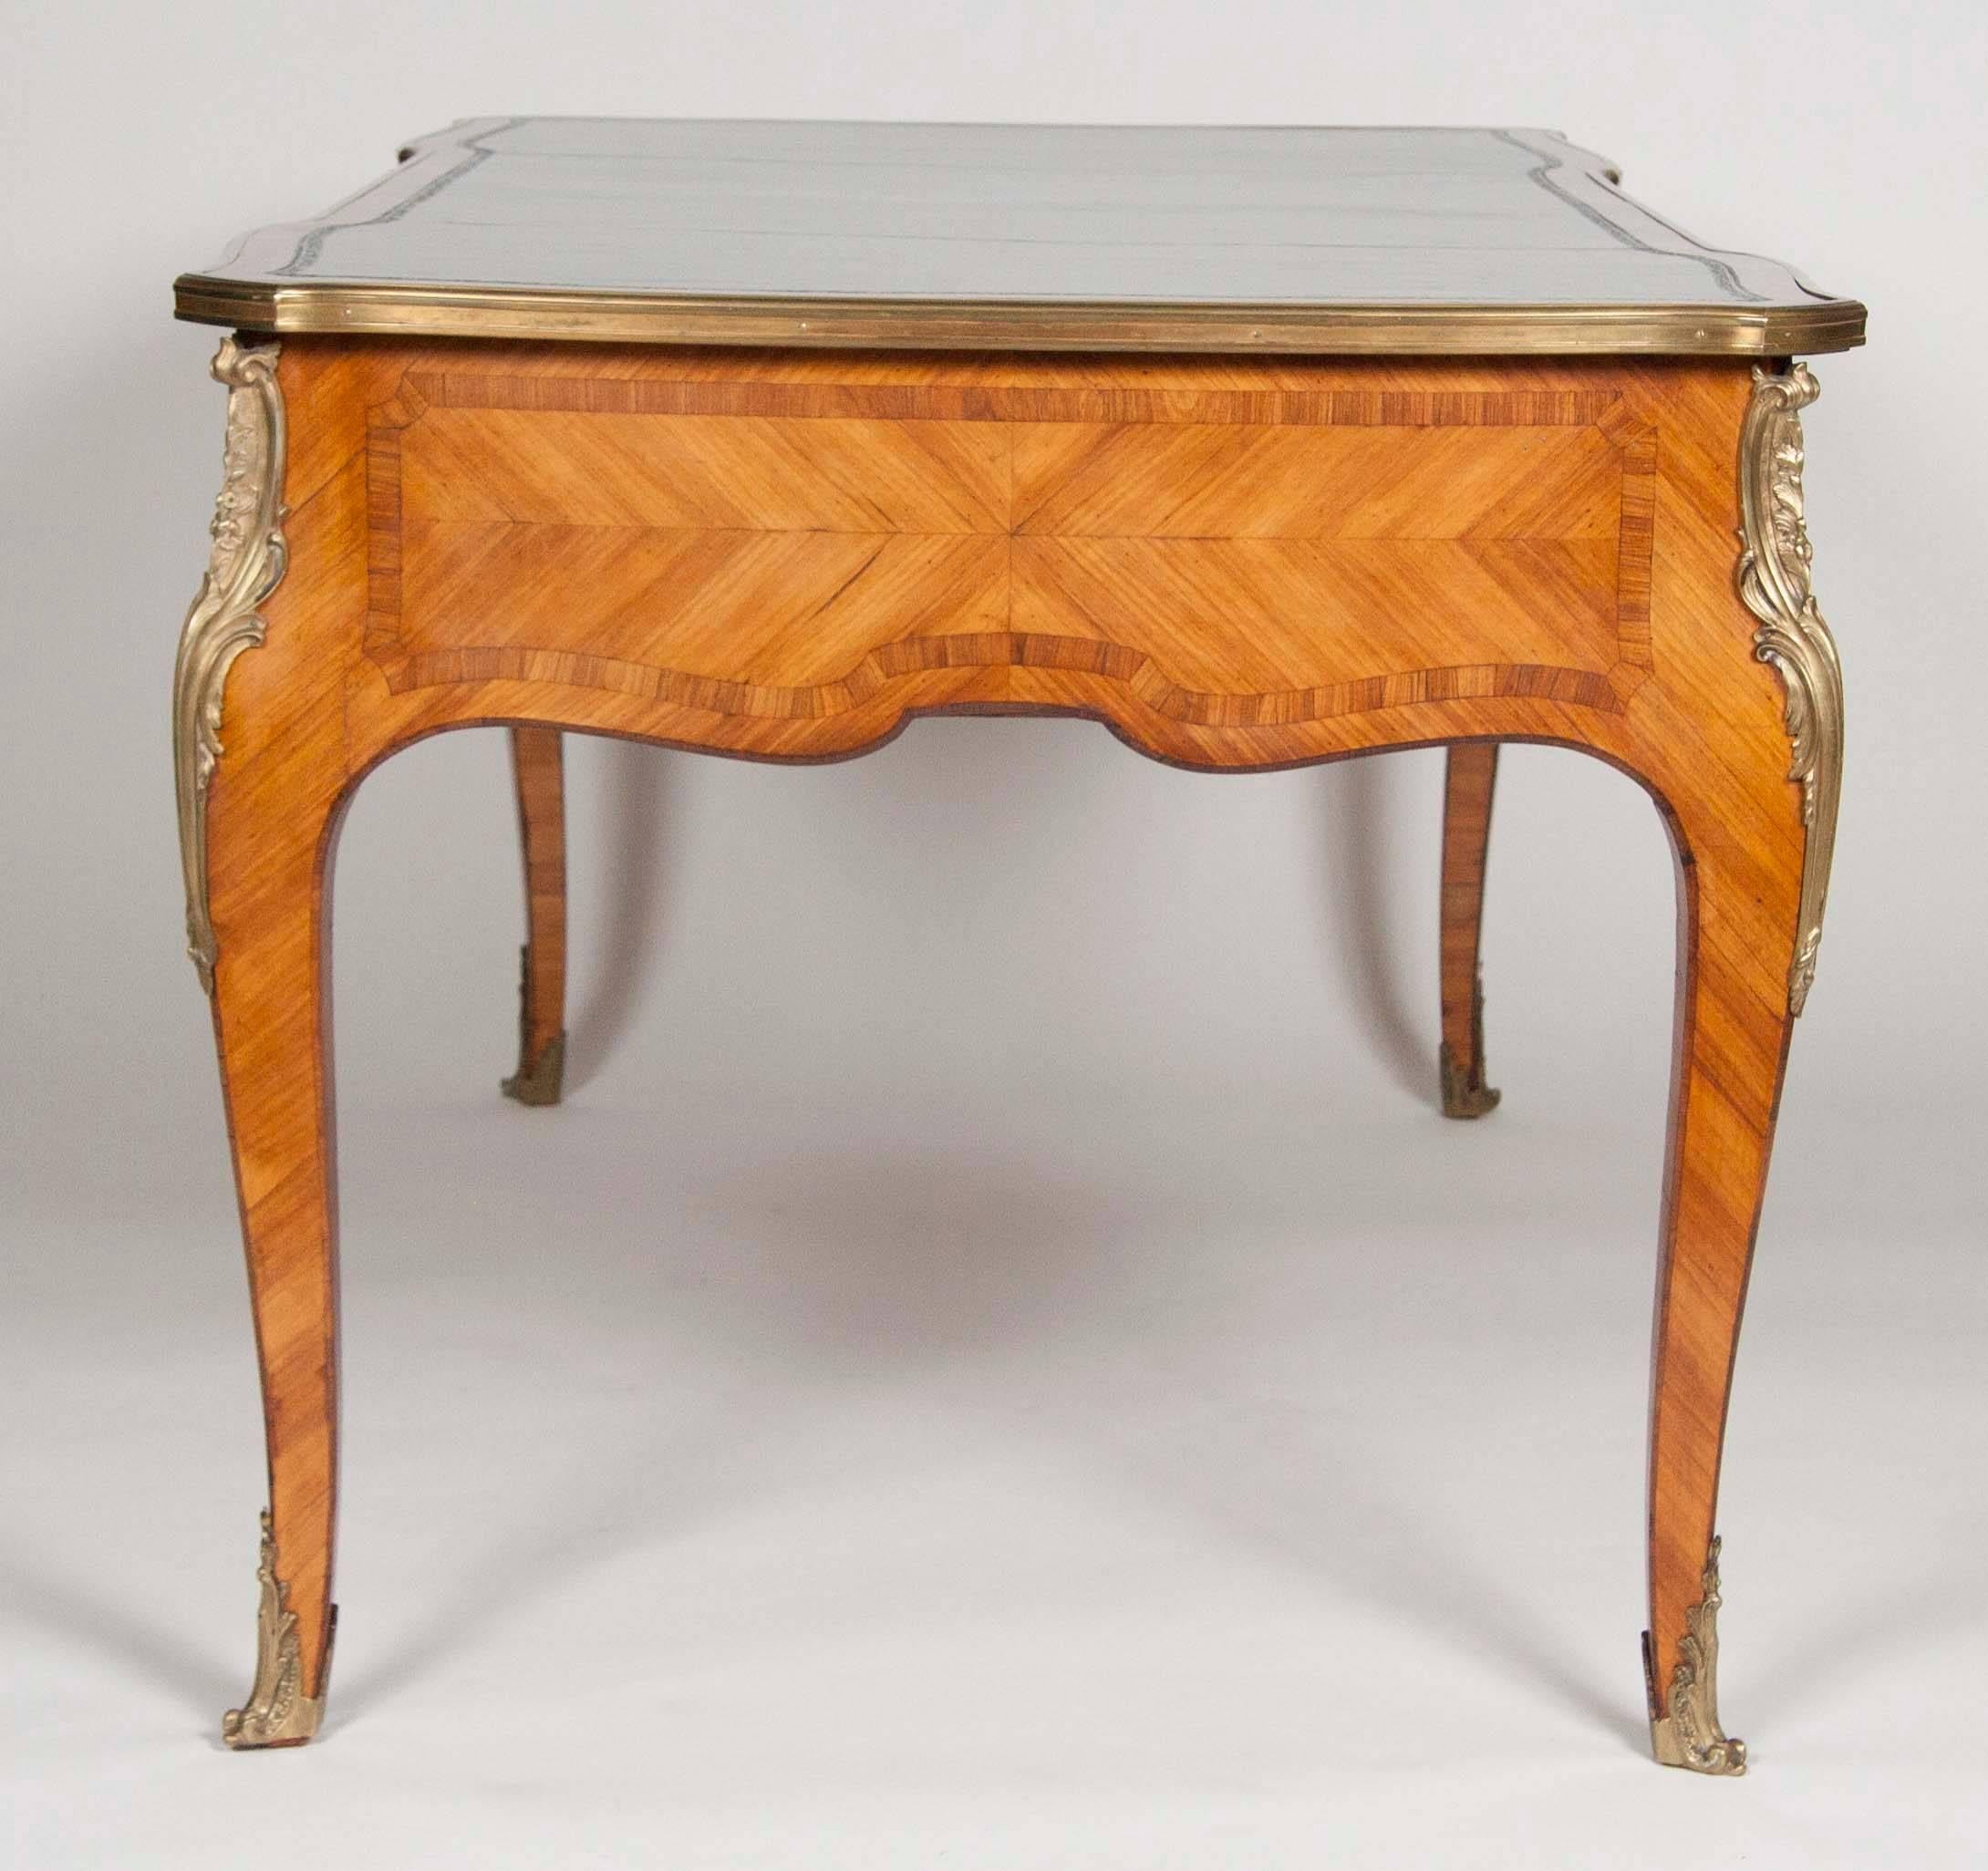 Kingwood Bureau Plat in the Louis XV Style with Tooled Leather Top 2